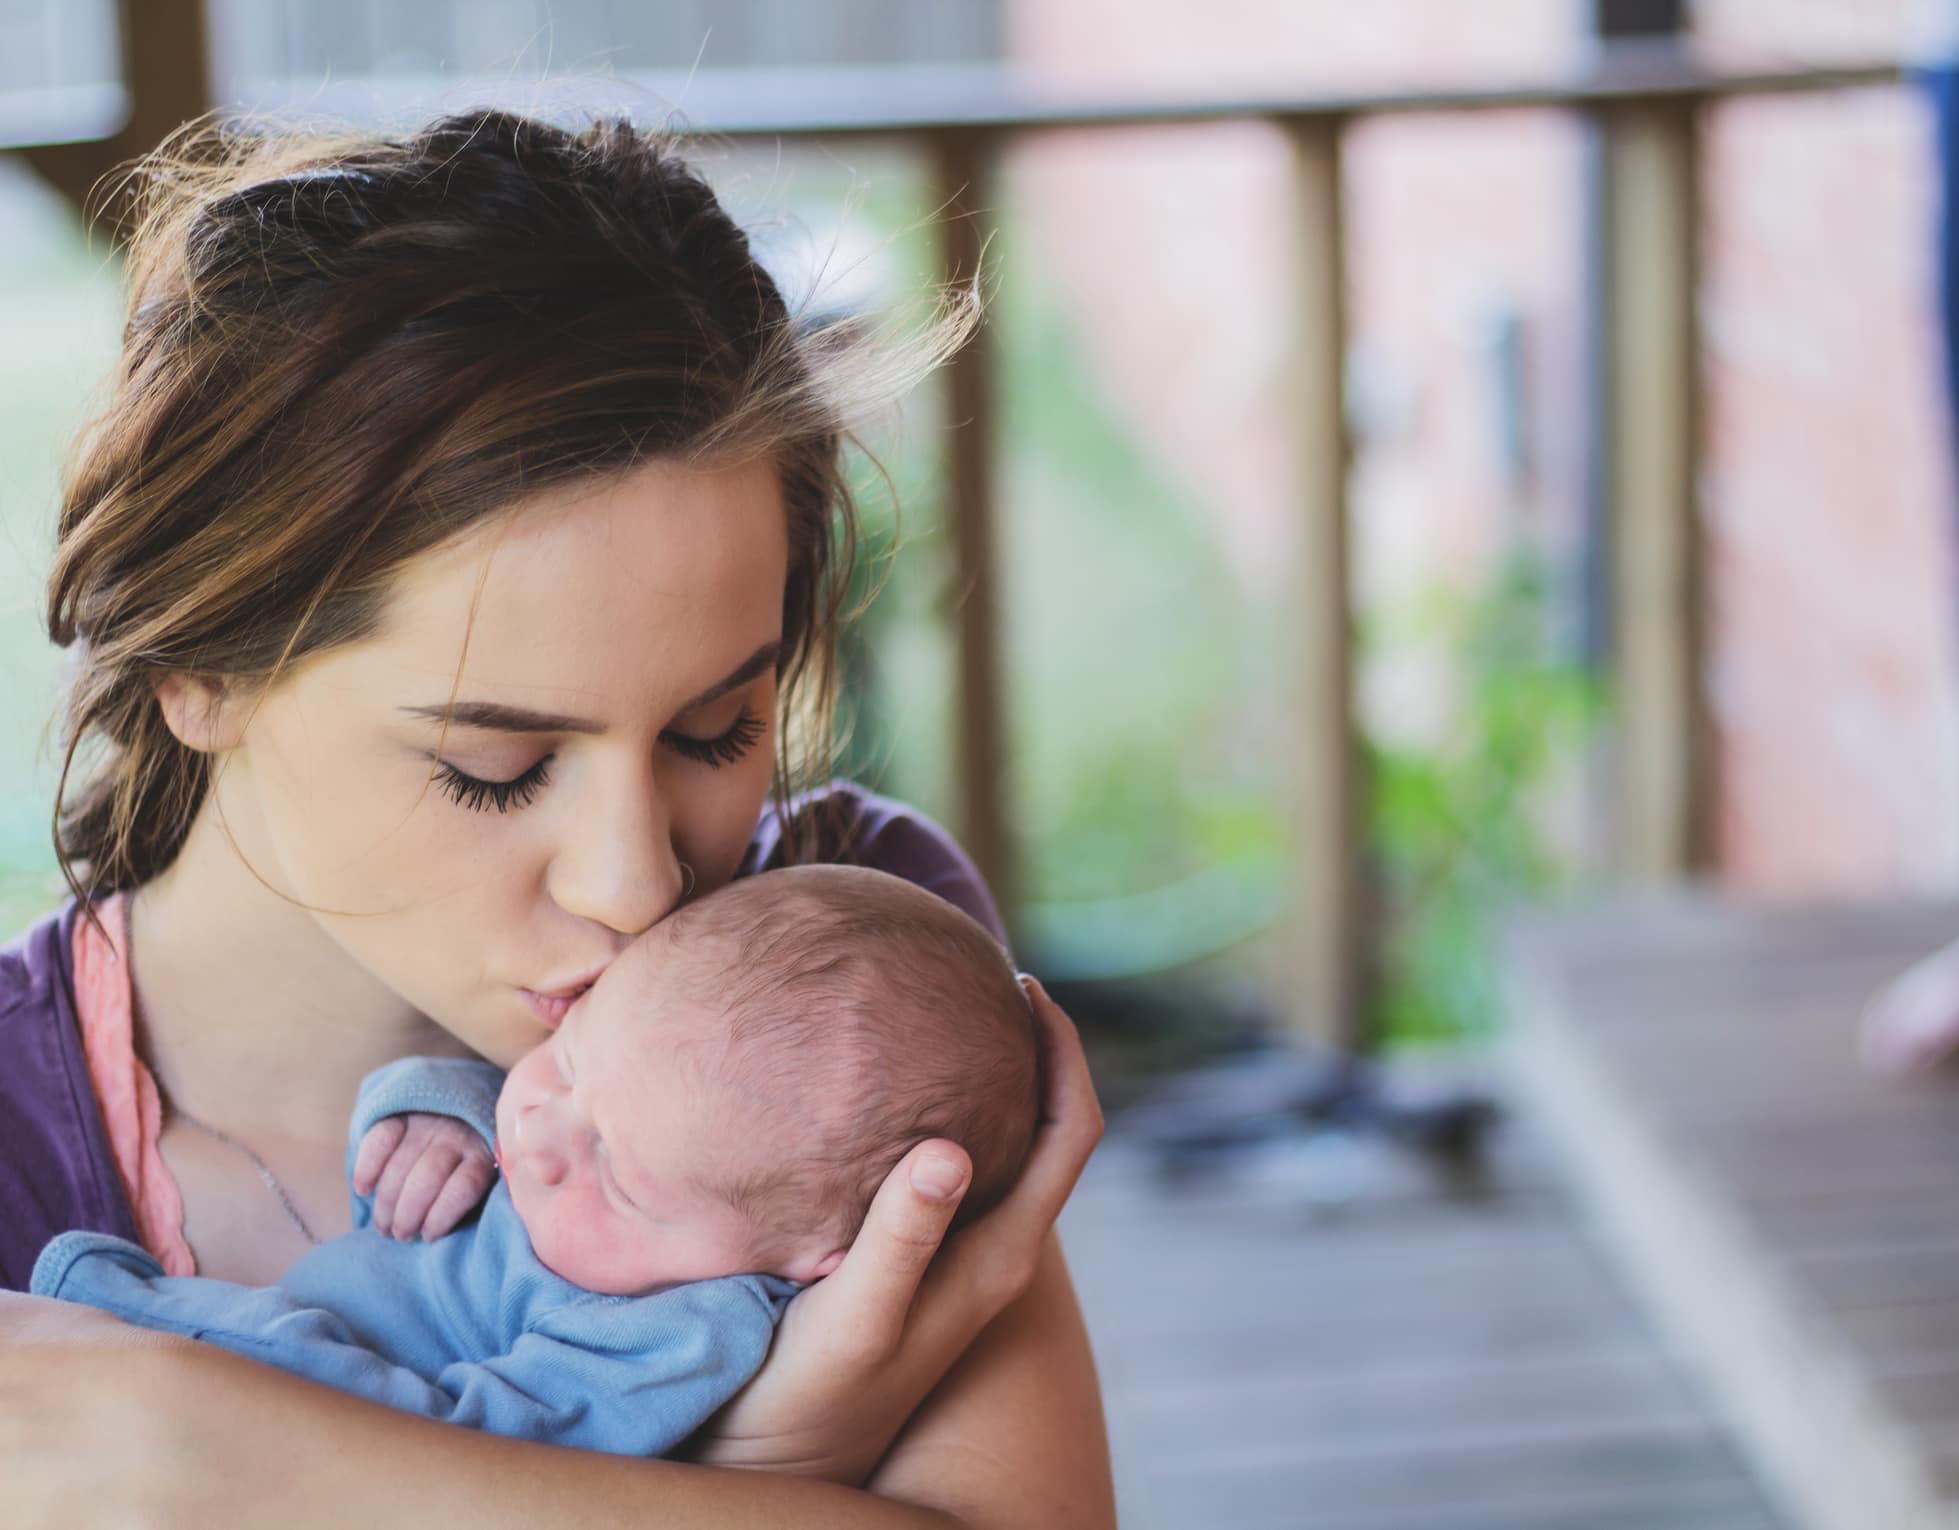 New Mothers Can Trust Their Instincts, Science Confirms